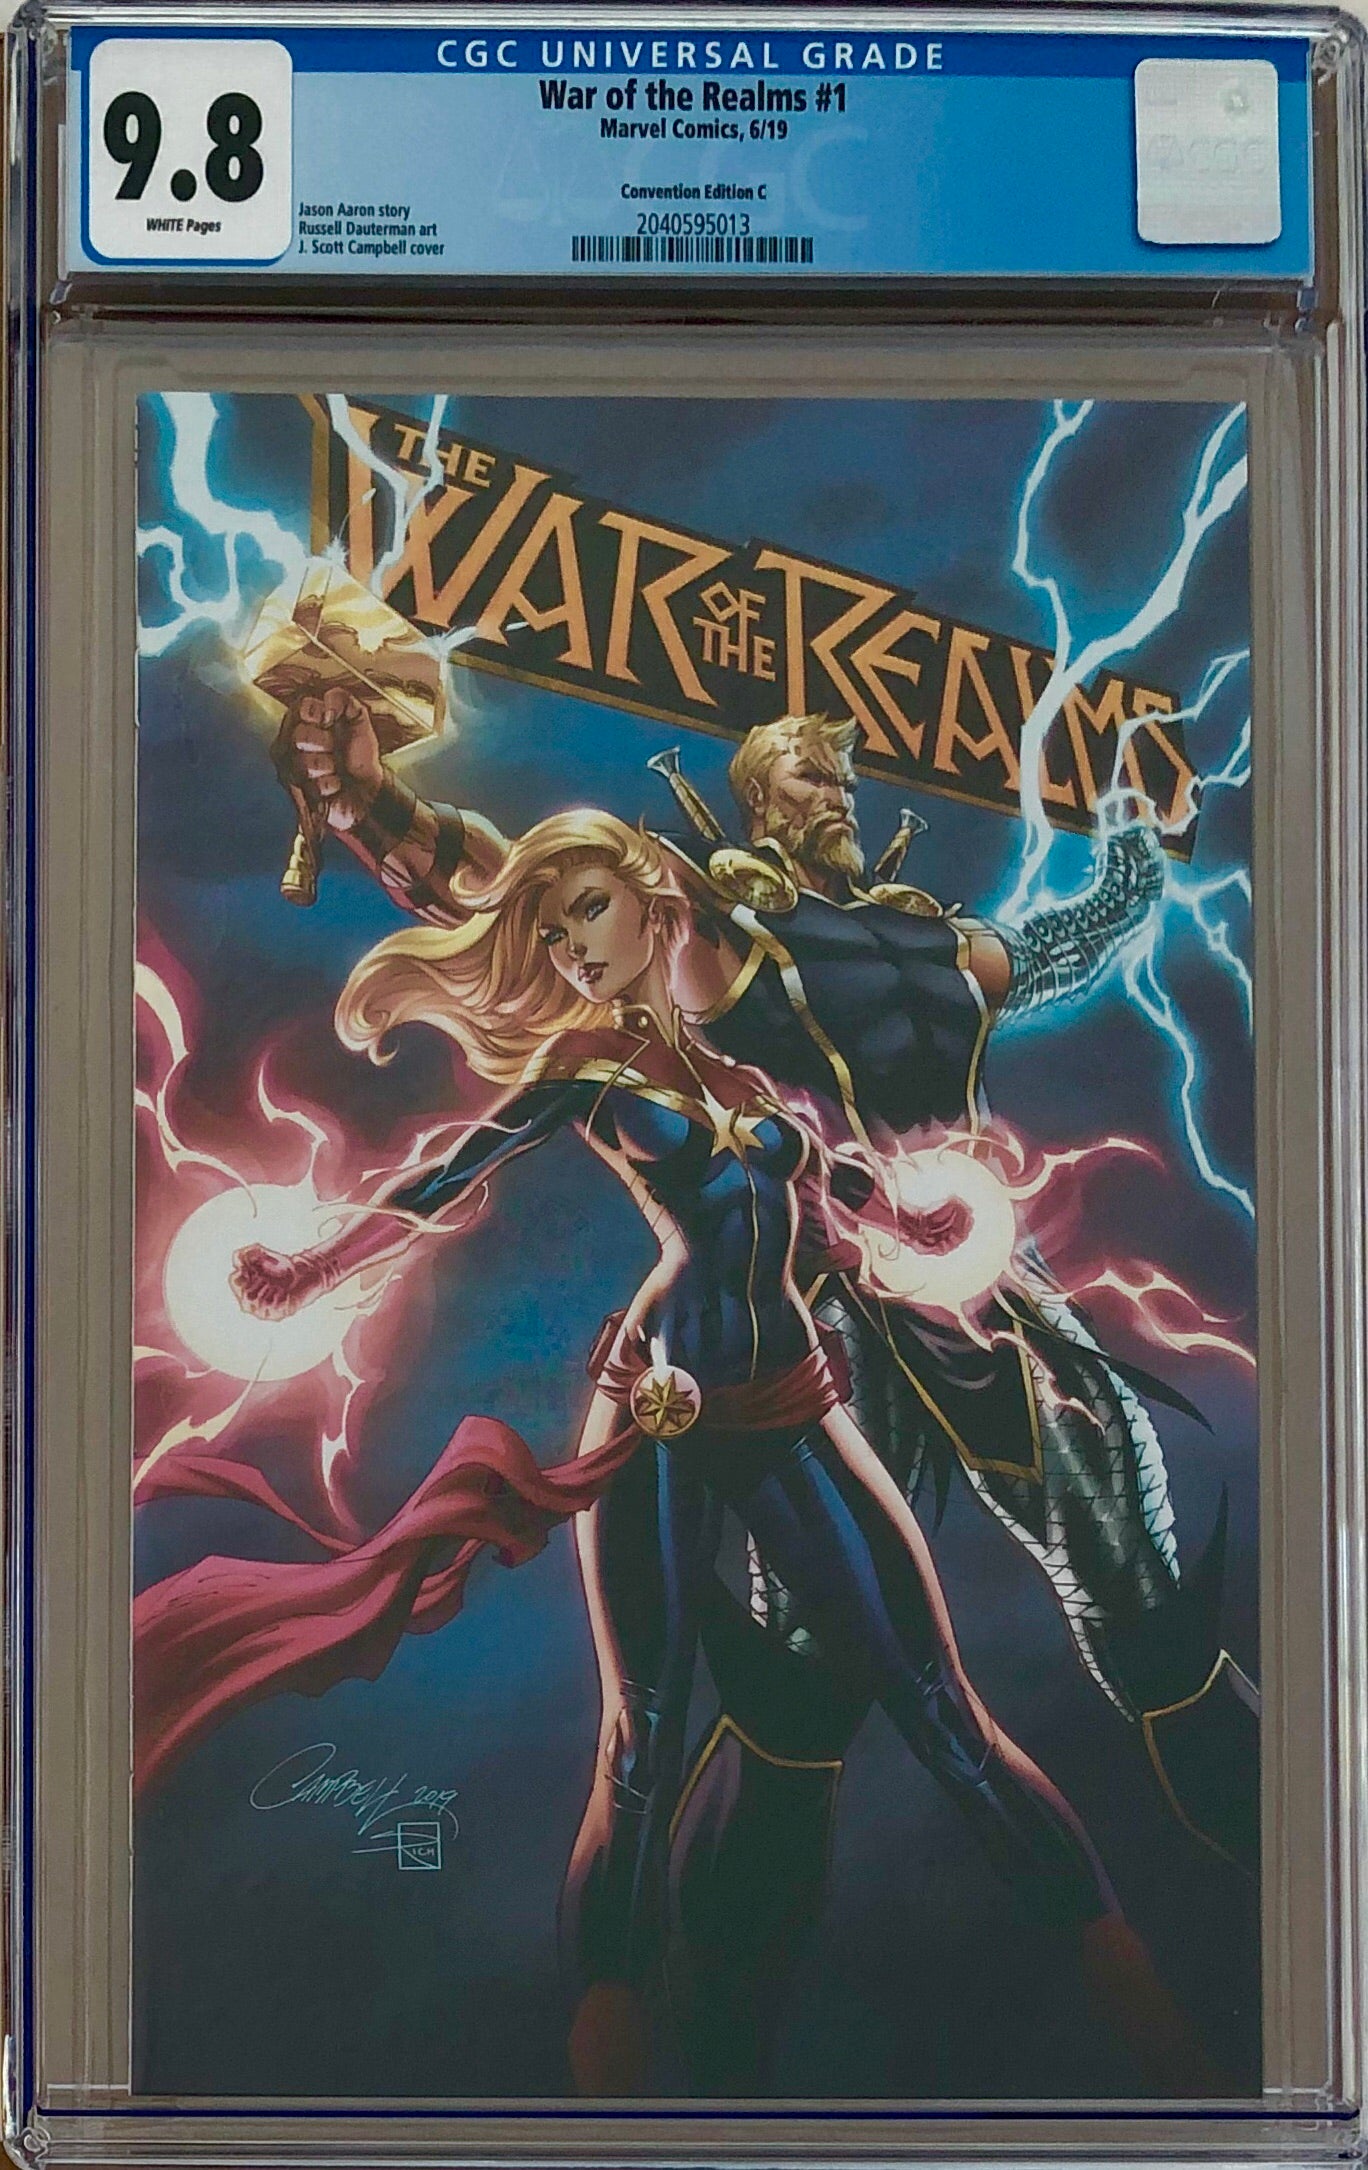 War of the Realms #1 J. Scott Campbell Con Exclusive C CGC 9.8